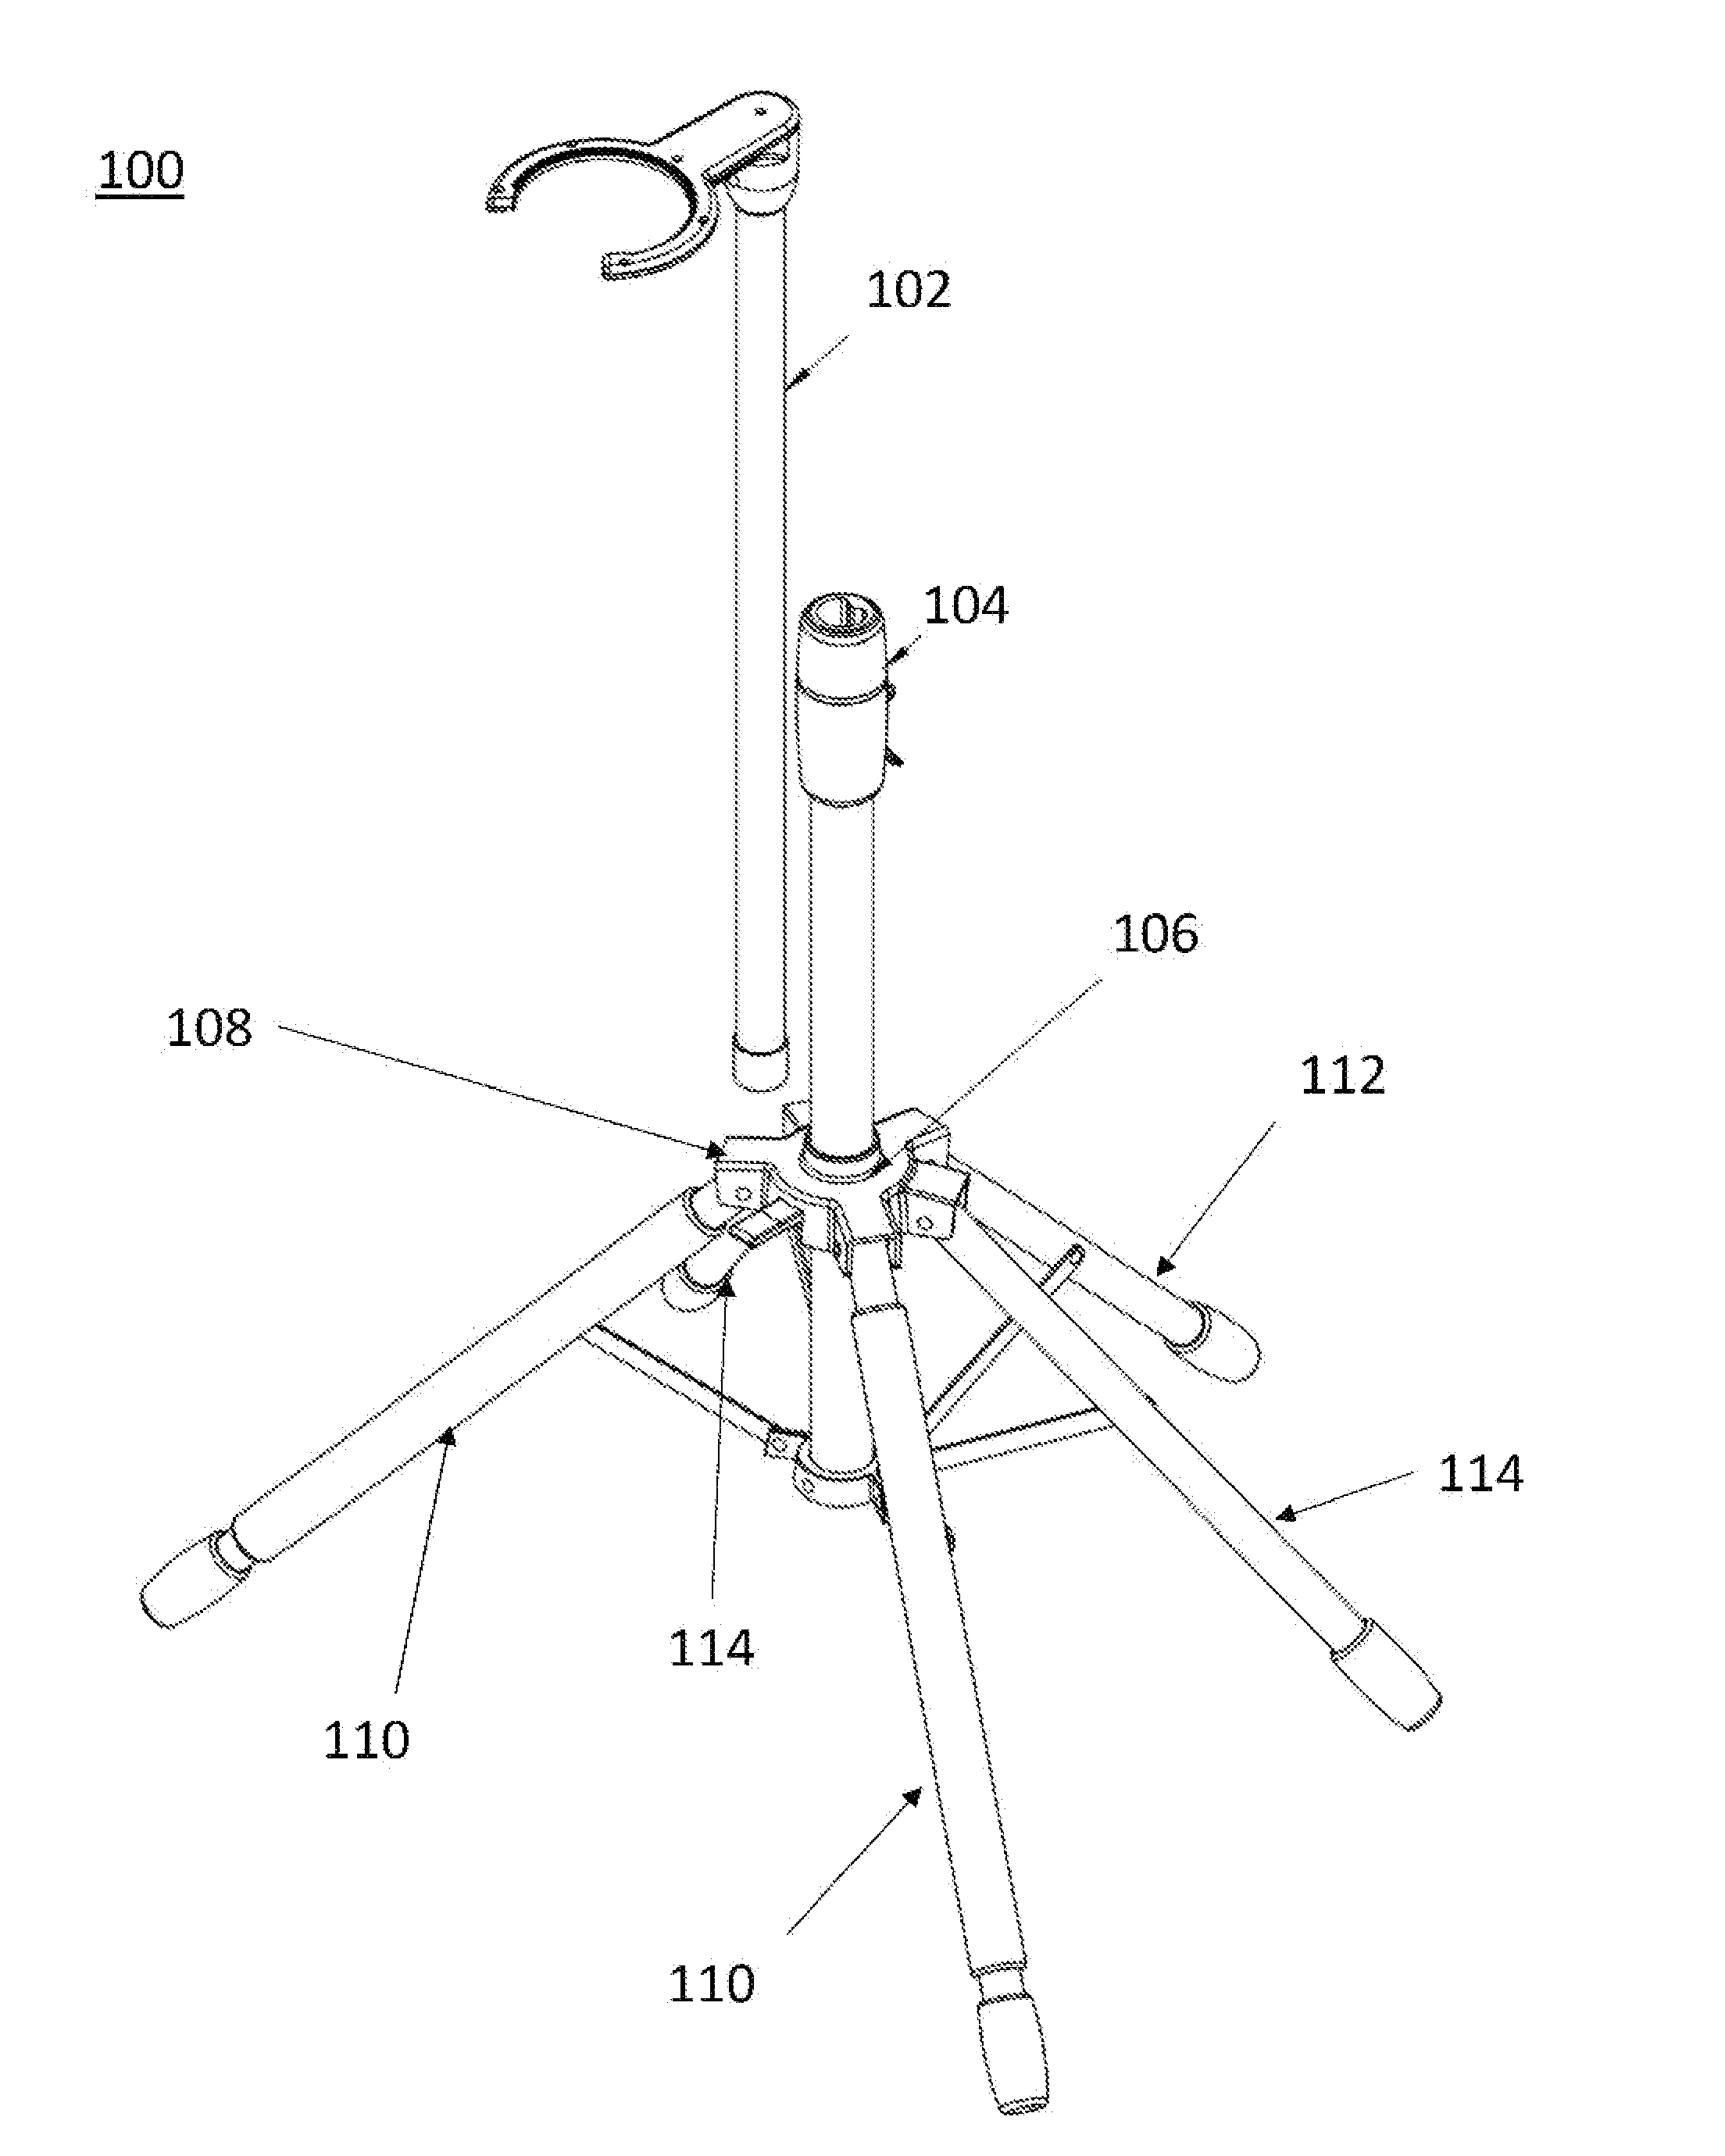 Multi-legged stand with stabilizers